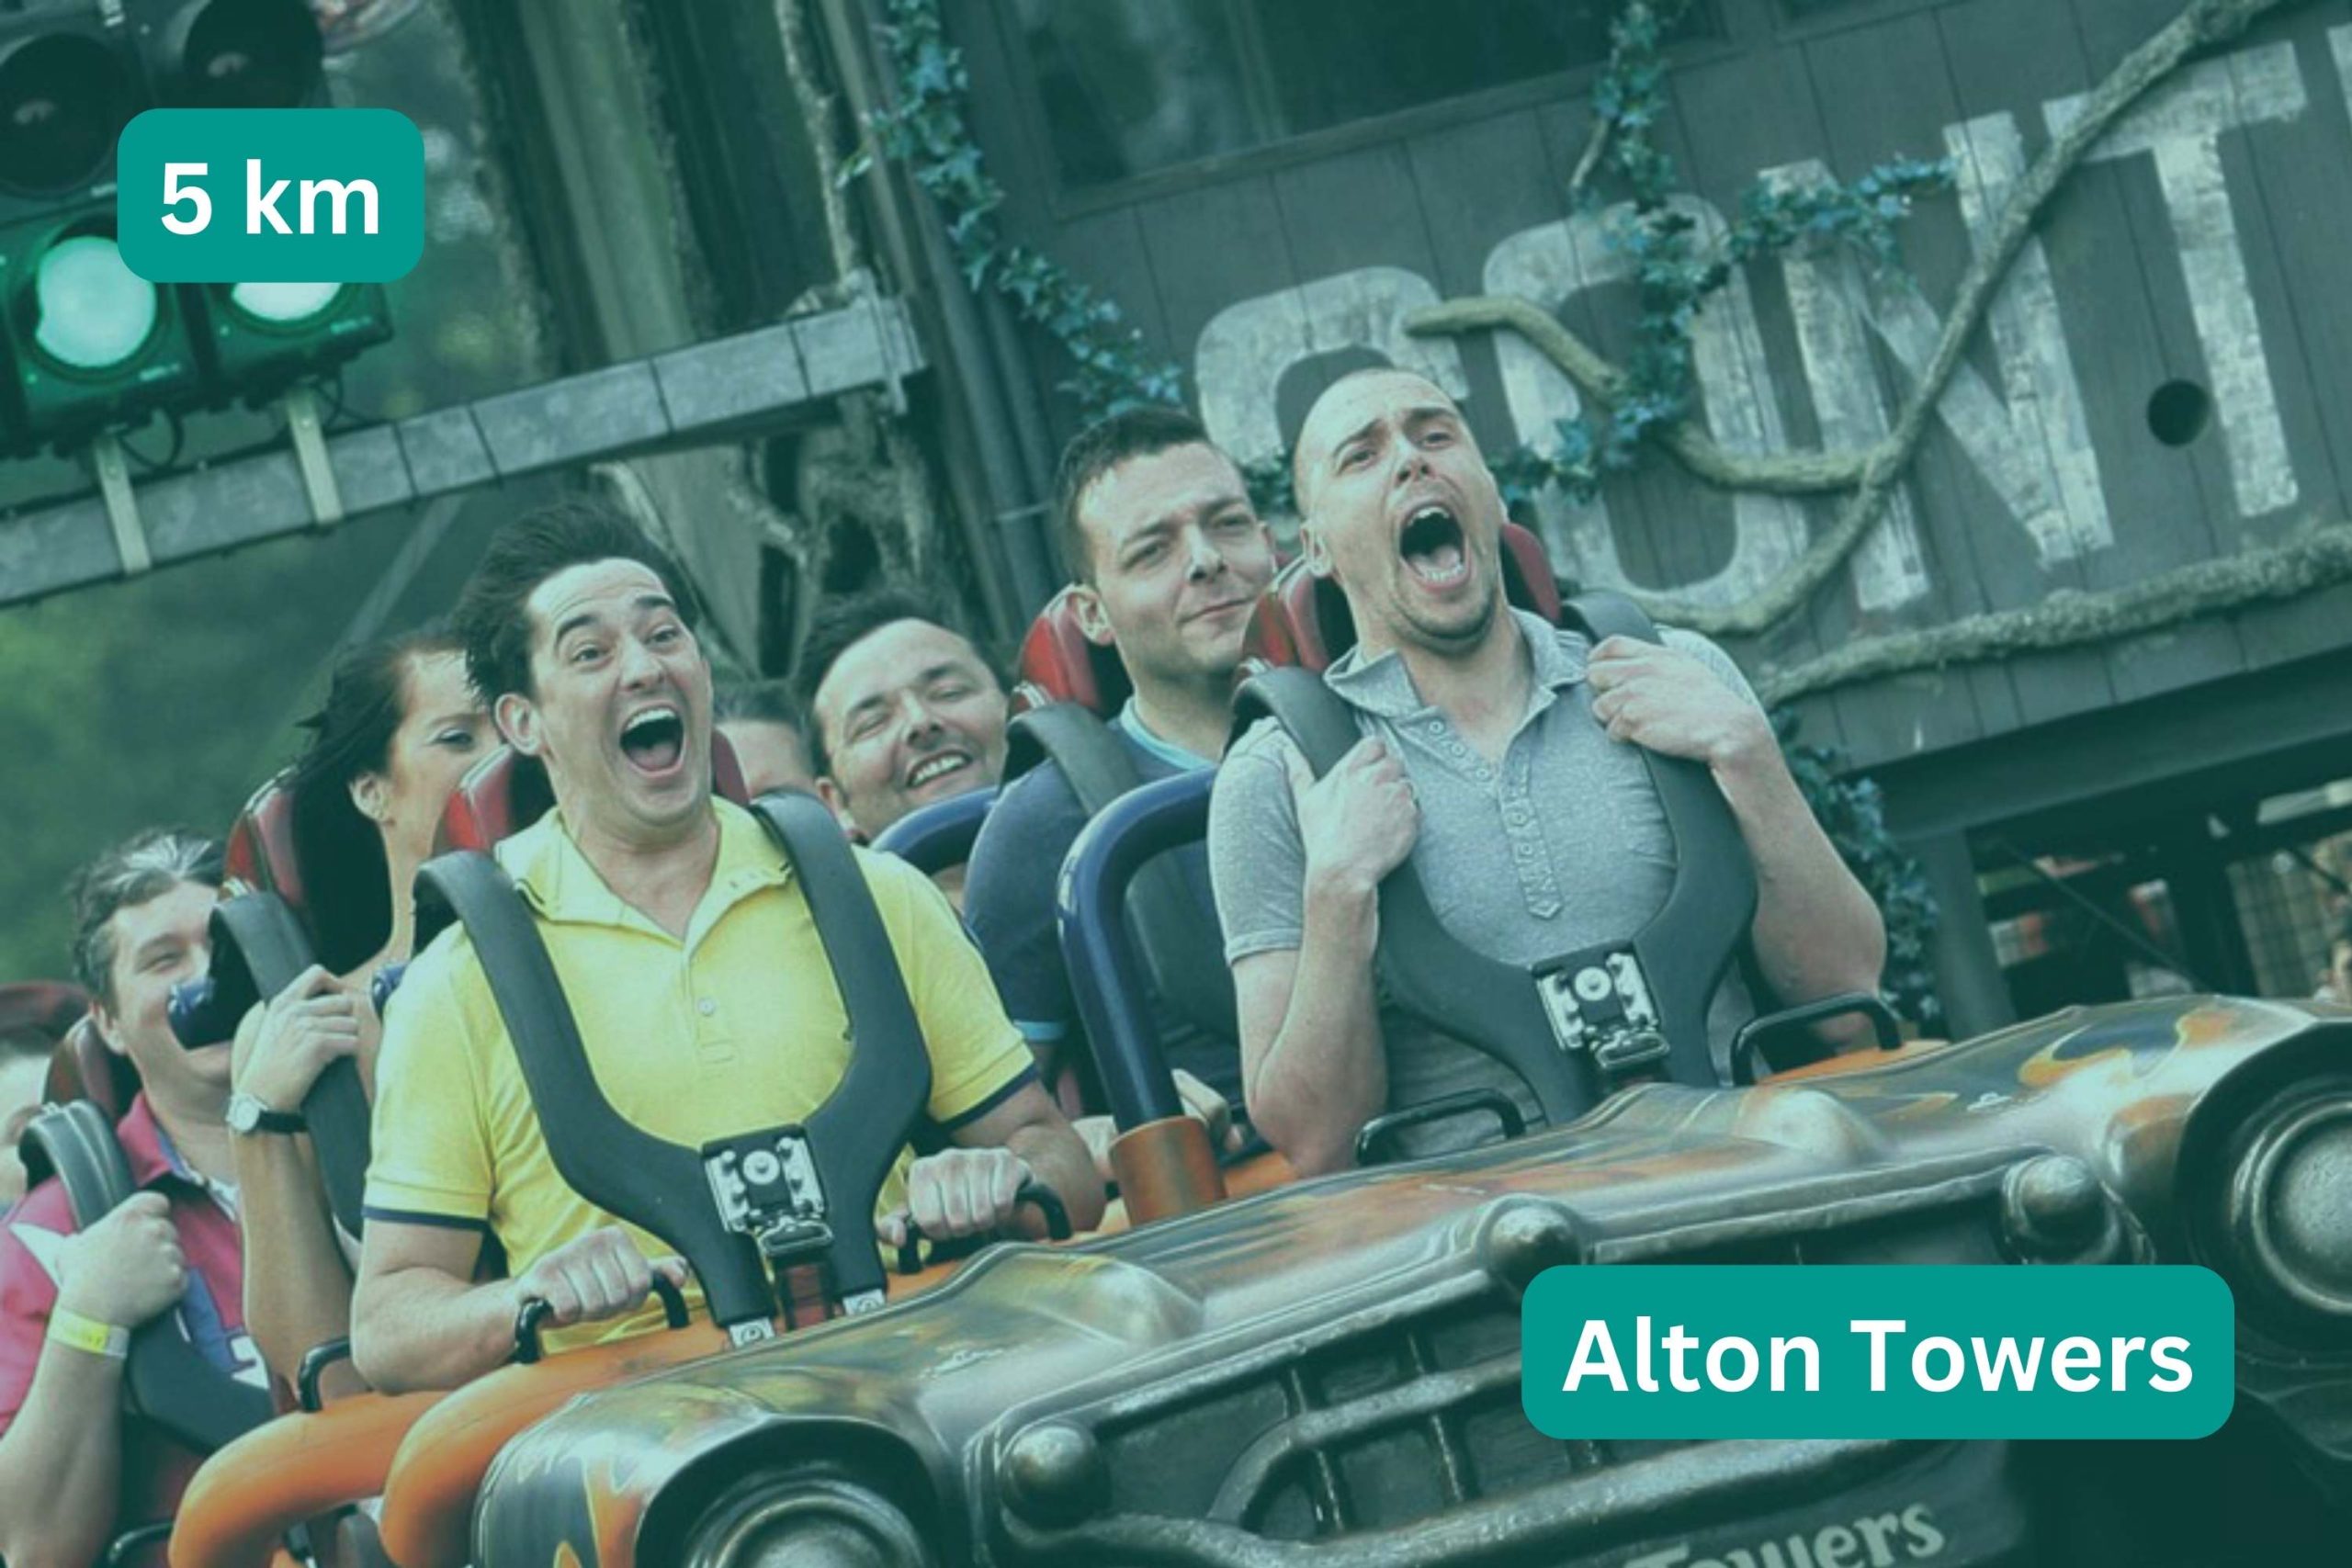 People on roller coaster in Alton Towers. Title text 5km, Alton Towers